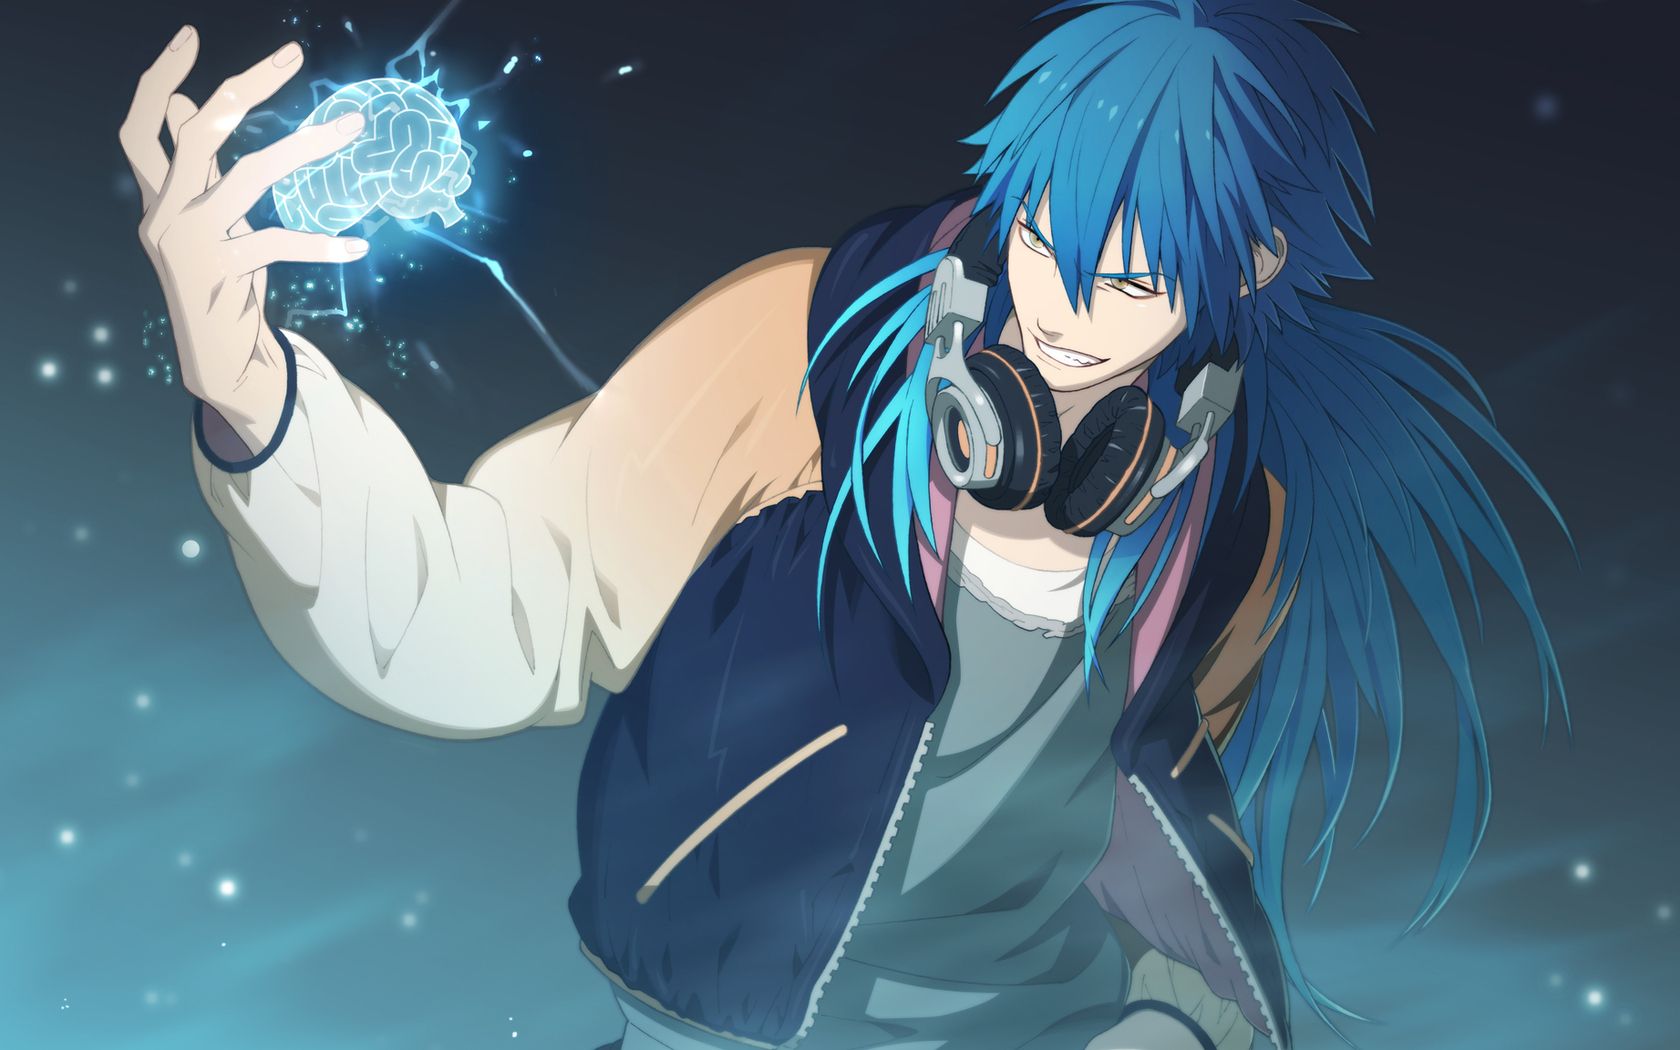 Free download Blue Haired Anime Boy 1680 x 1050 Download Close [1680x1050] for your Desktop, Mobile & Tablet. Explore Anime Gamer Wallpaper. Anime Wallpaper Sites, Free Anime Wallpaper for